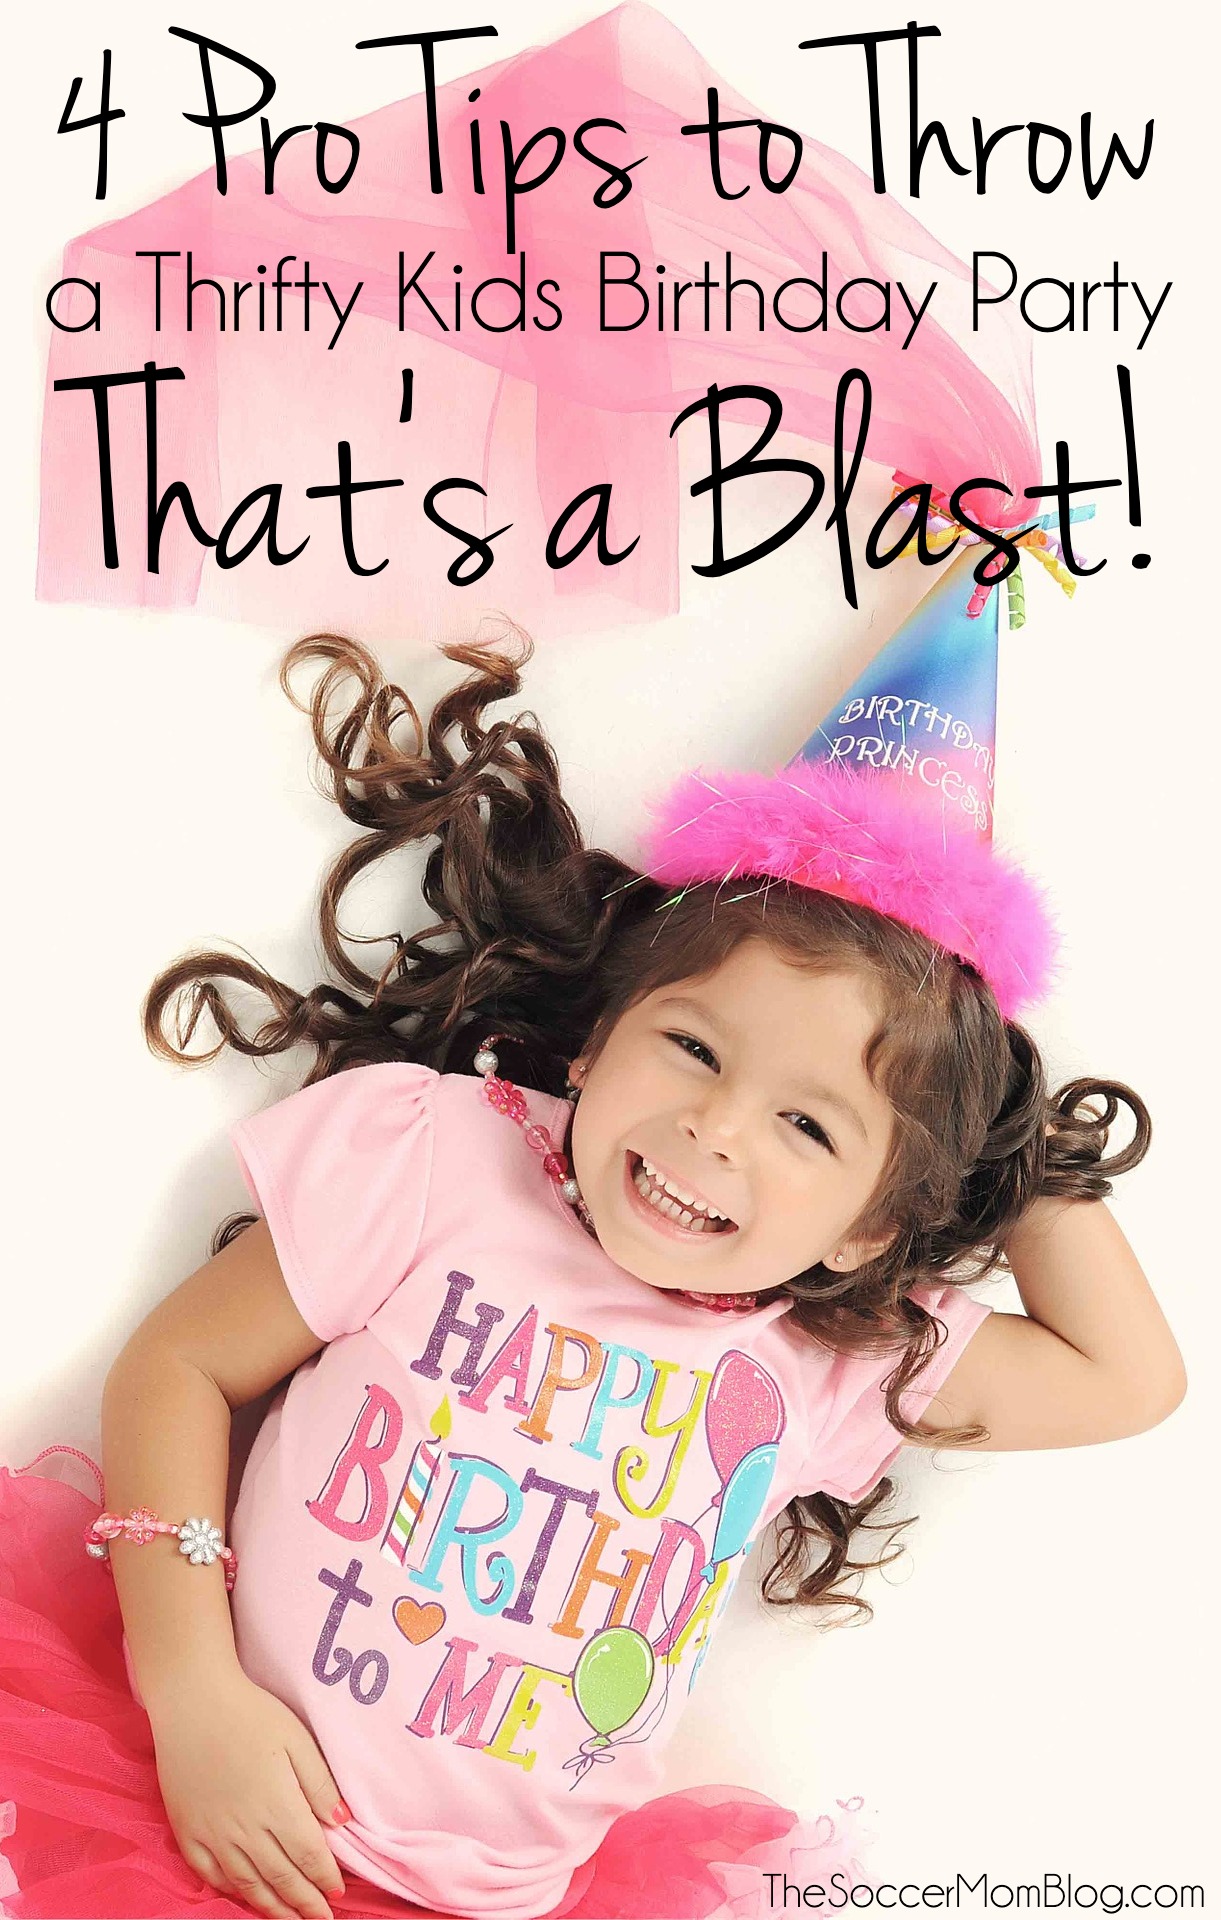 Tips from Lifestyle Expert Limor Suss about how to throw a thrifty kids birthday party with food, activities, and fun that won't break the bank!